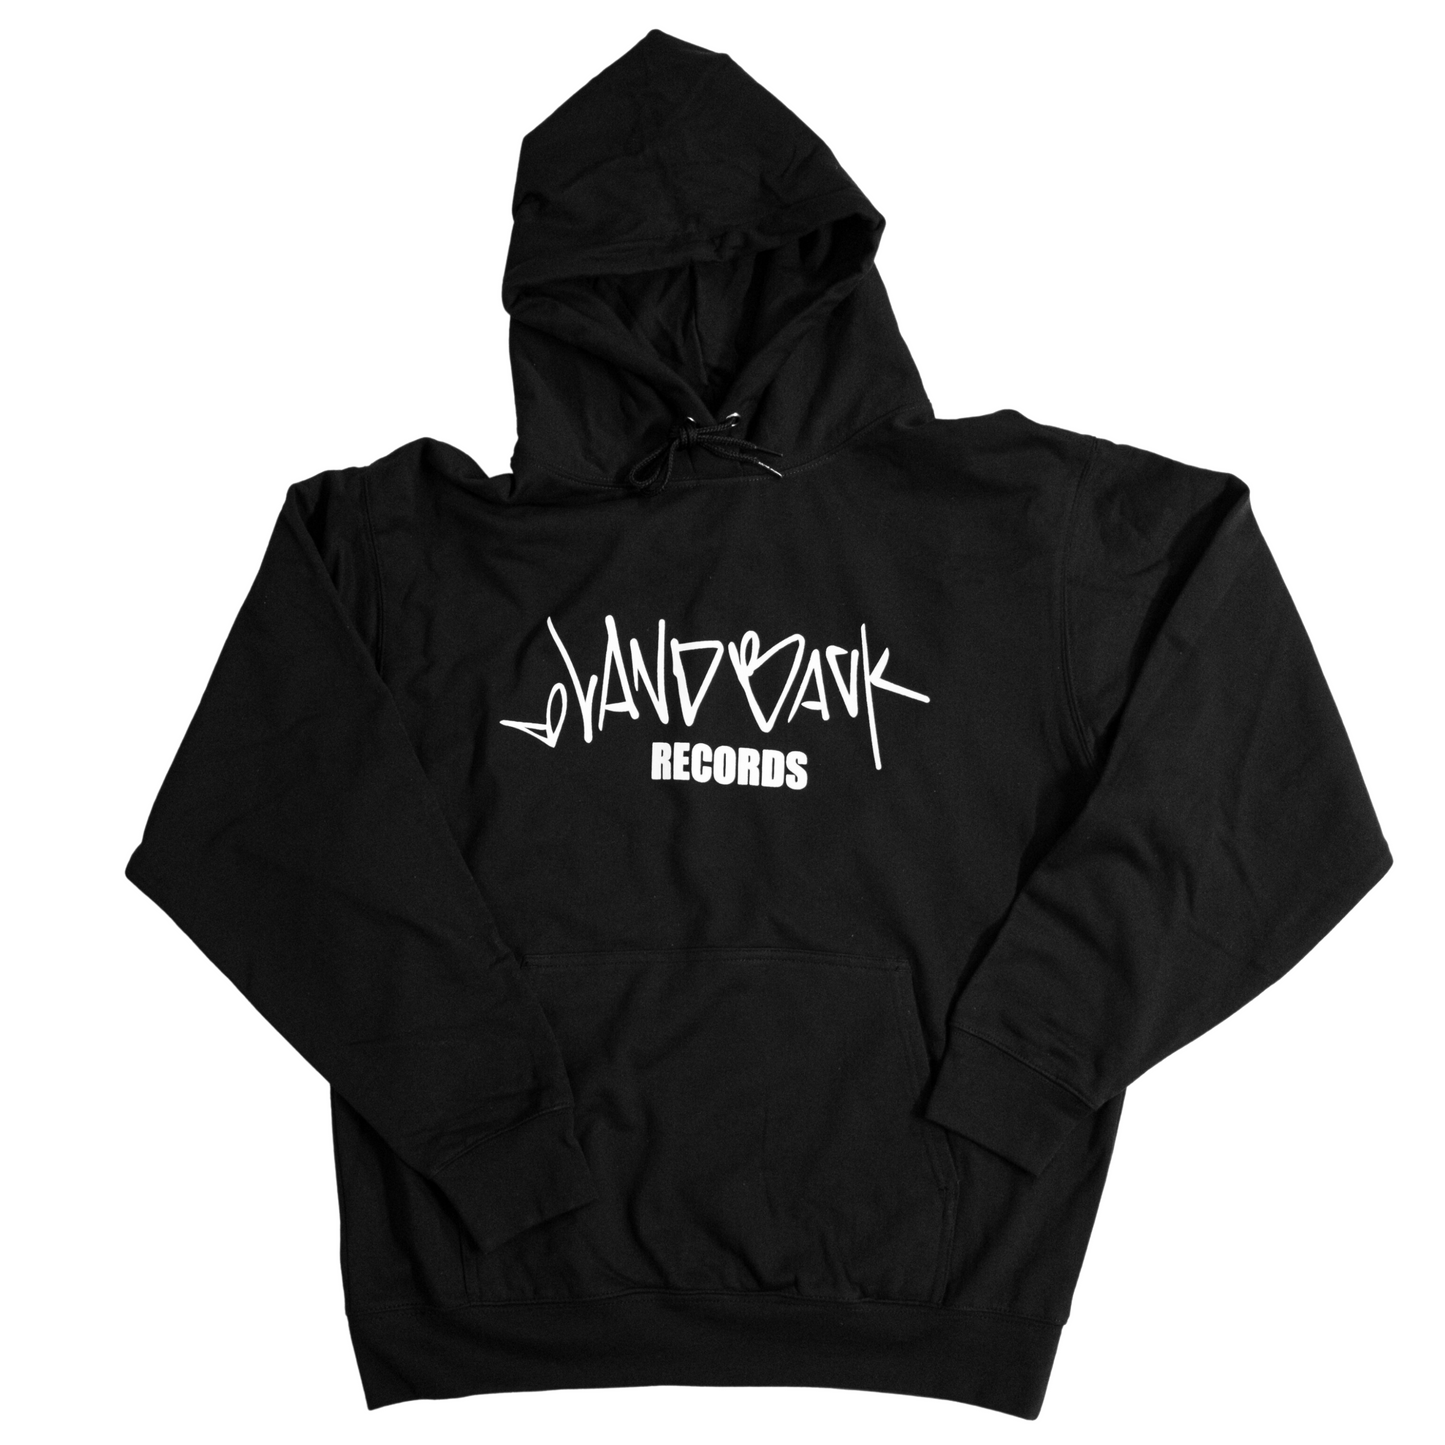 Land Back Records Hoodie